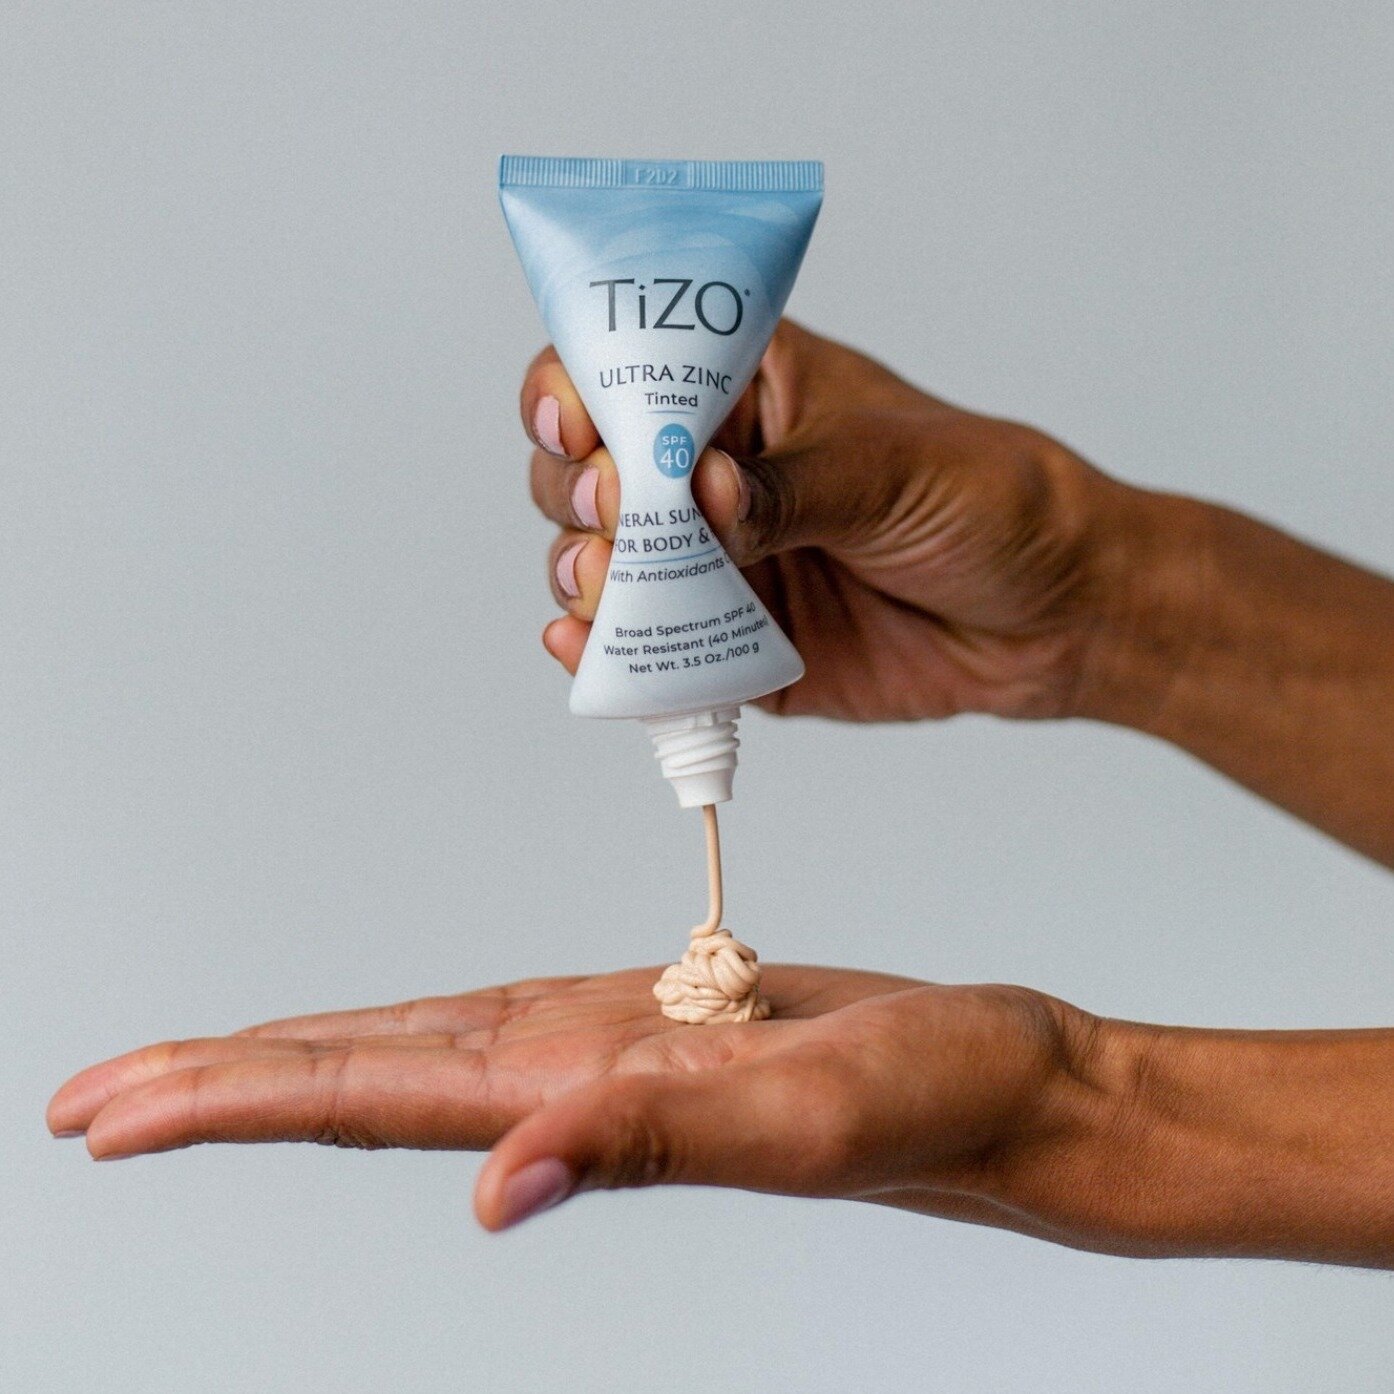 TIZO MINERAL SUNSCREEN 
-Now available at The Modern Naturopath online store or in the clinic

You all know how picky I am with products, what I put on my face/body, and what I sell in the clinic. It's got to be hormone safe, planet-friendly, effecti